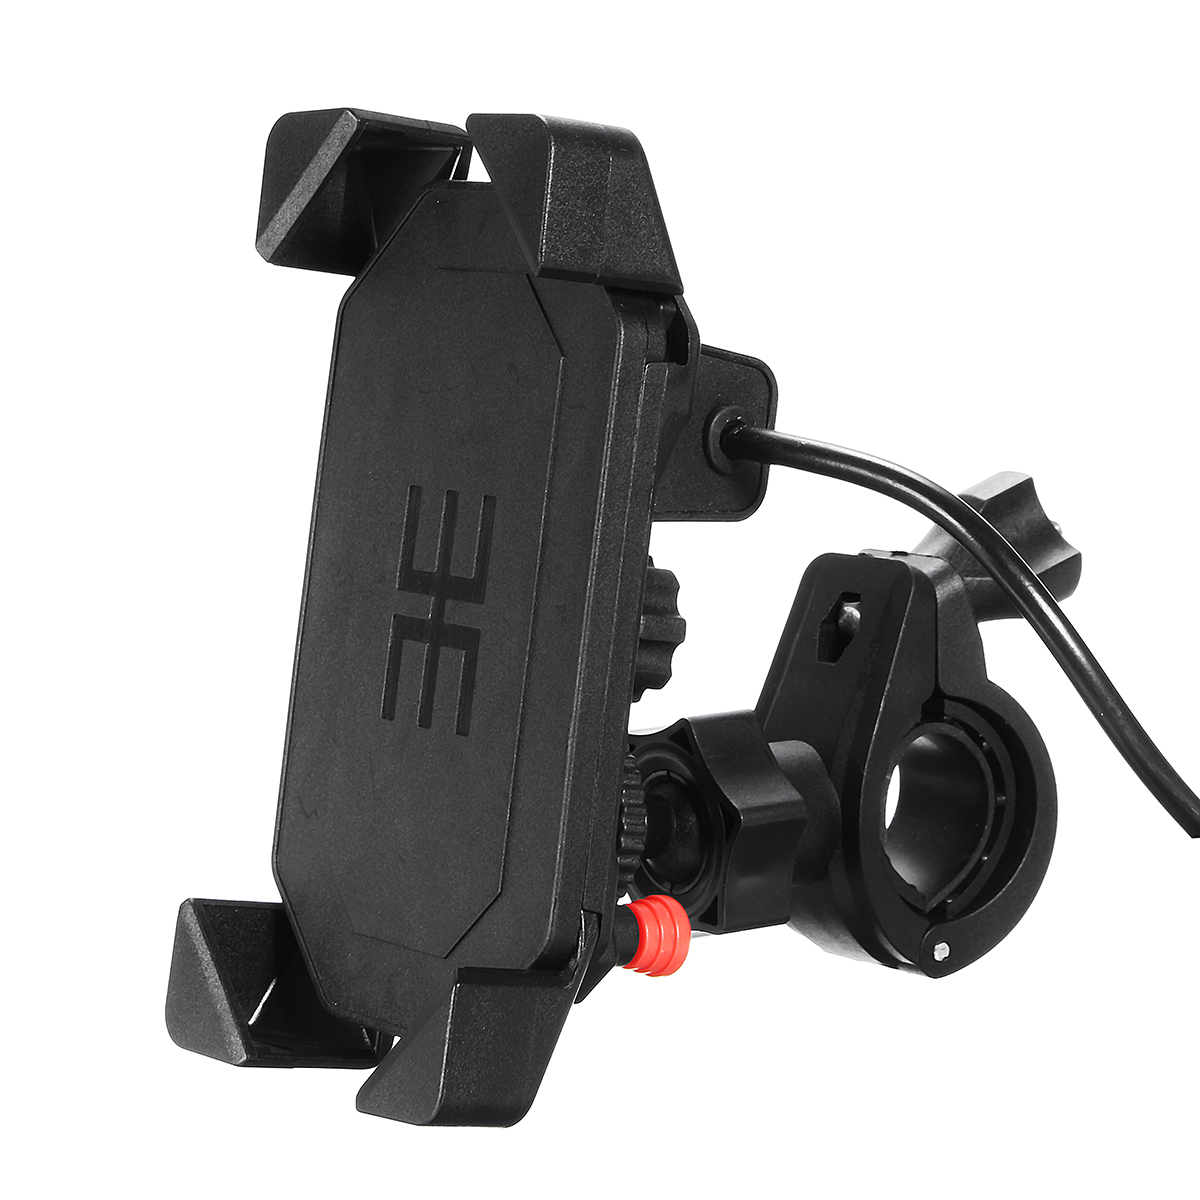 

Universal Motorcycle Bike Handlebar Mount Holder USB Charger For 3.5-6inch Cell Phone GPS